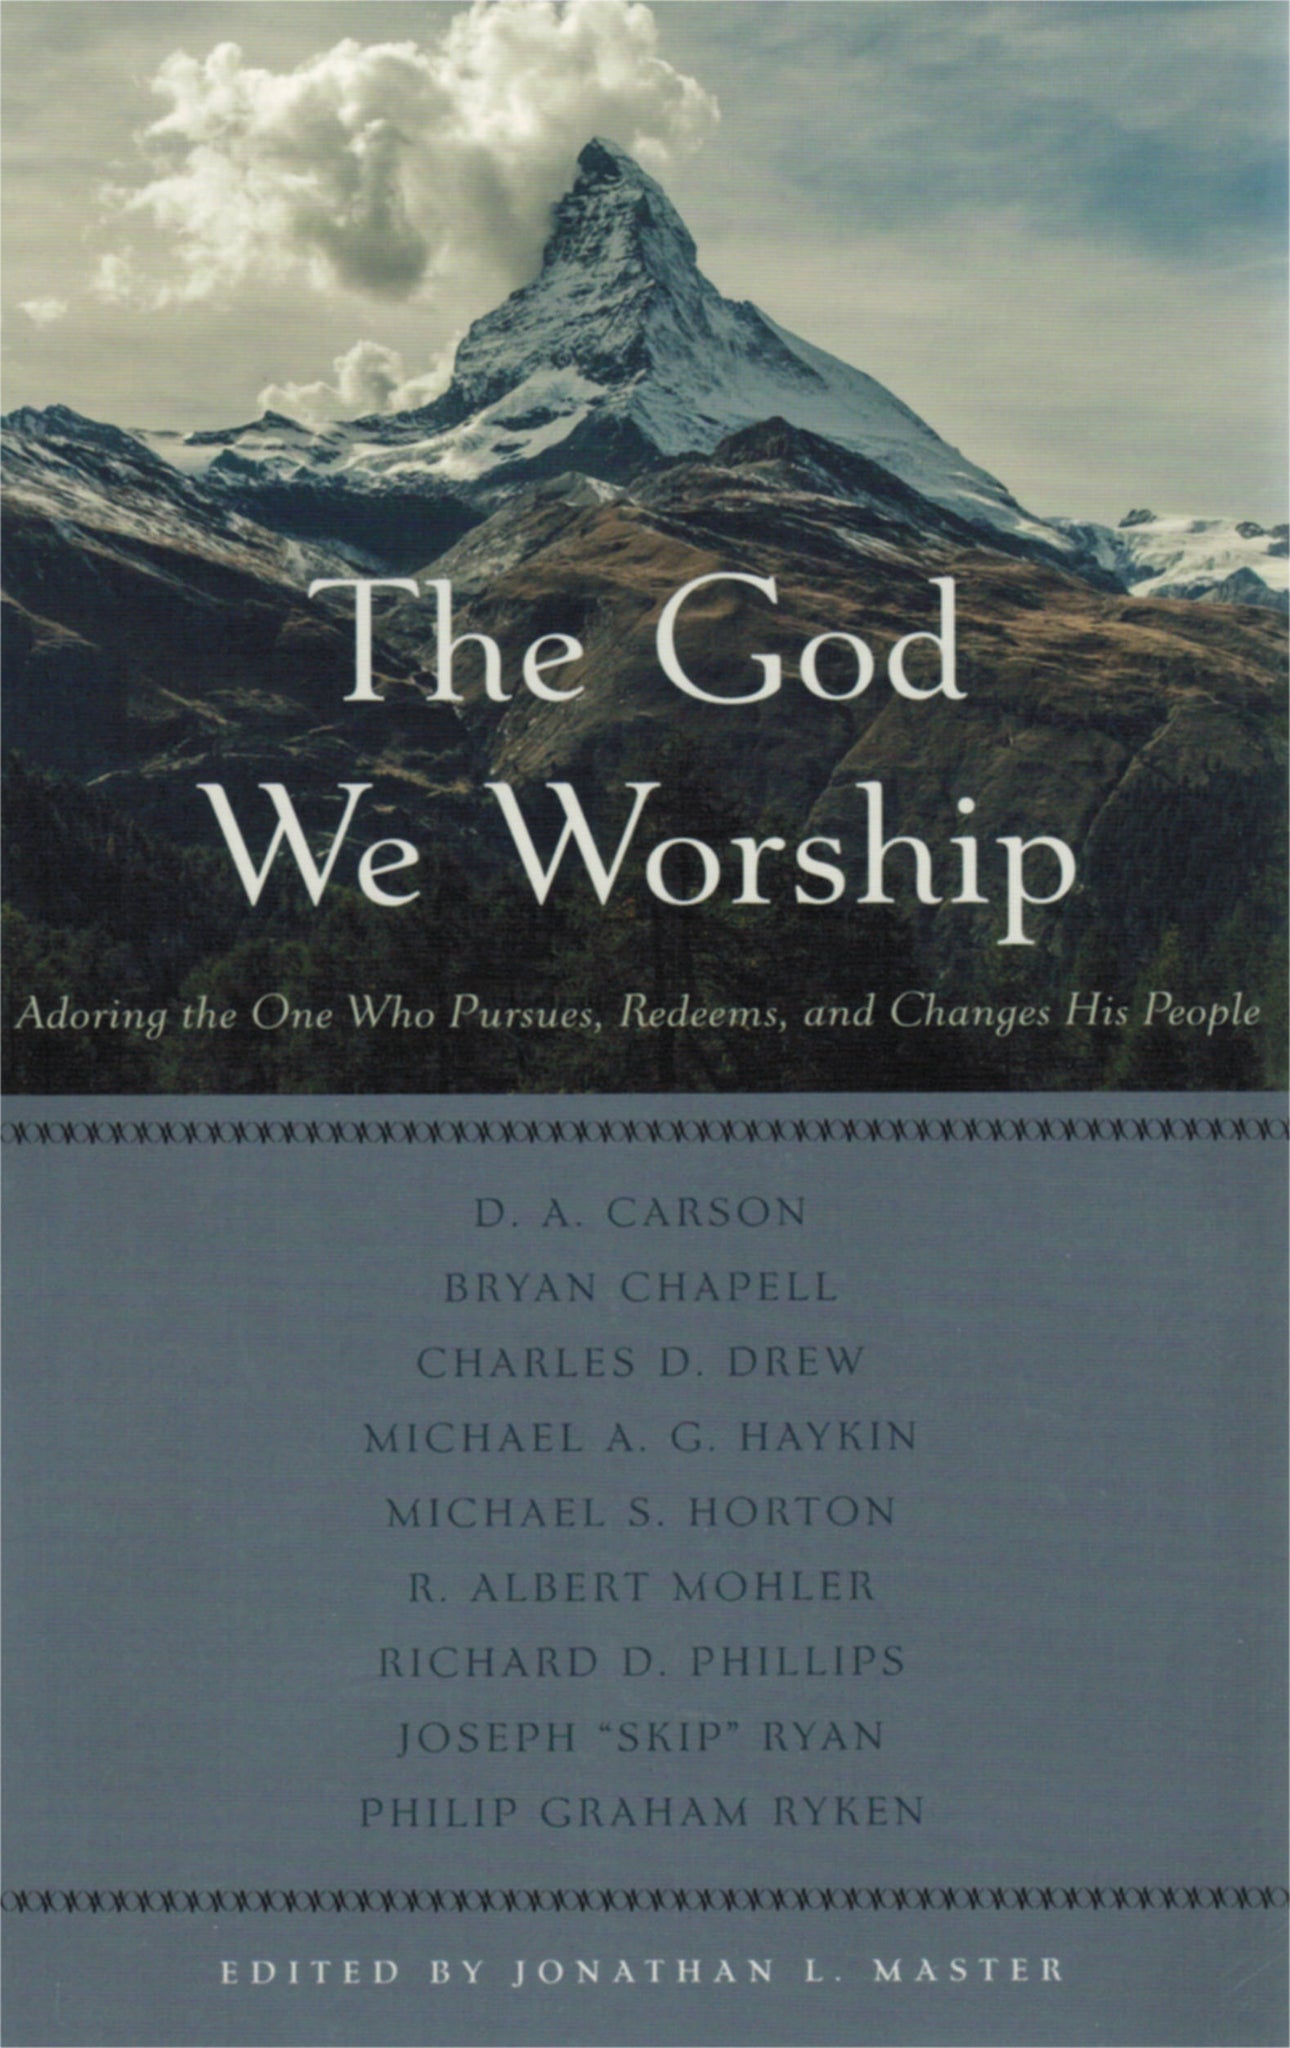 The God We Worship: Adoring the One Who Pursues, Redeems and Changes His People